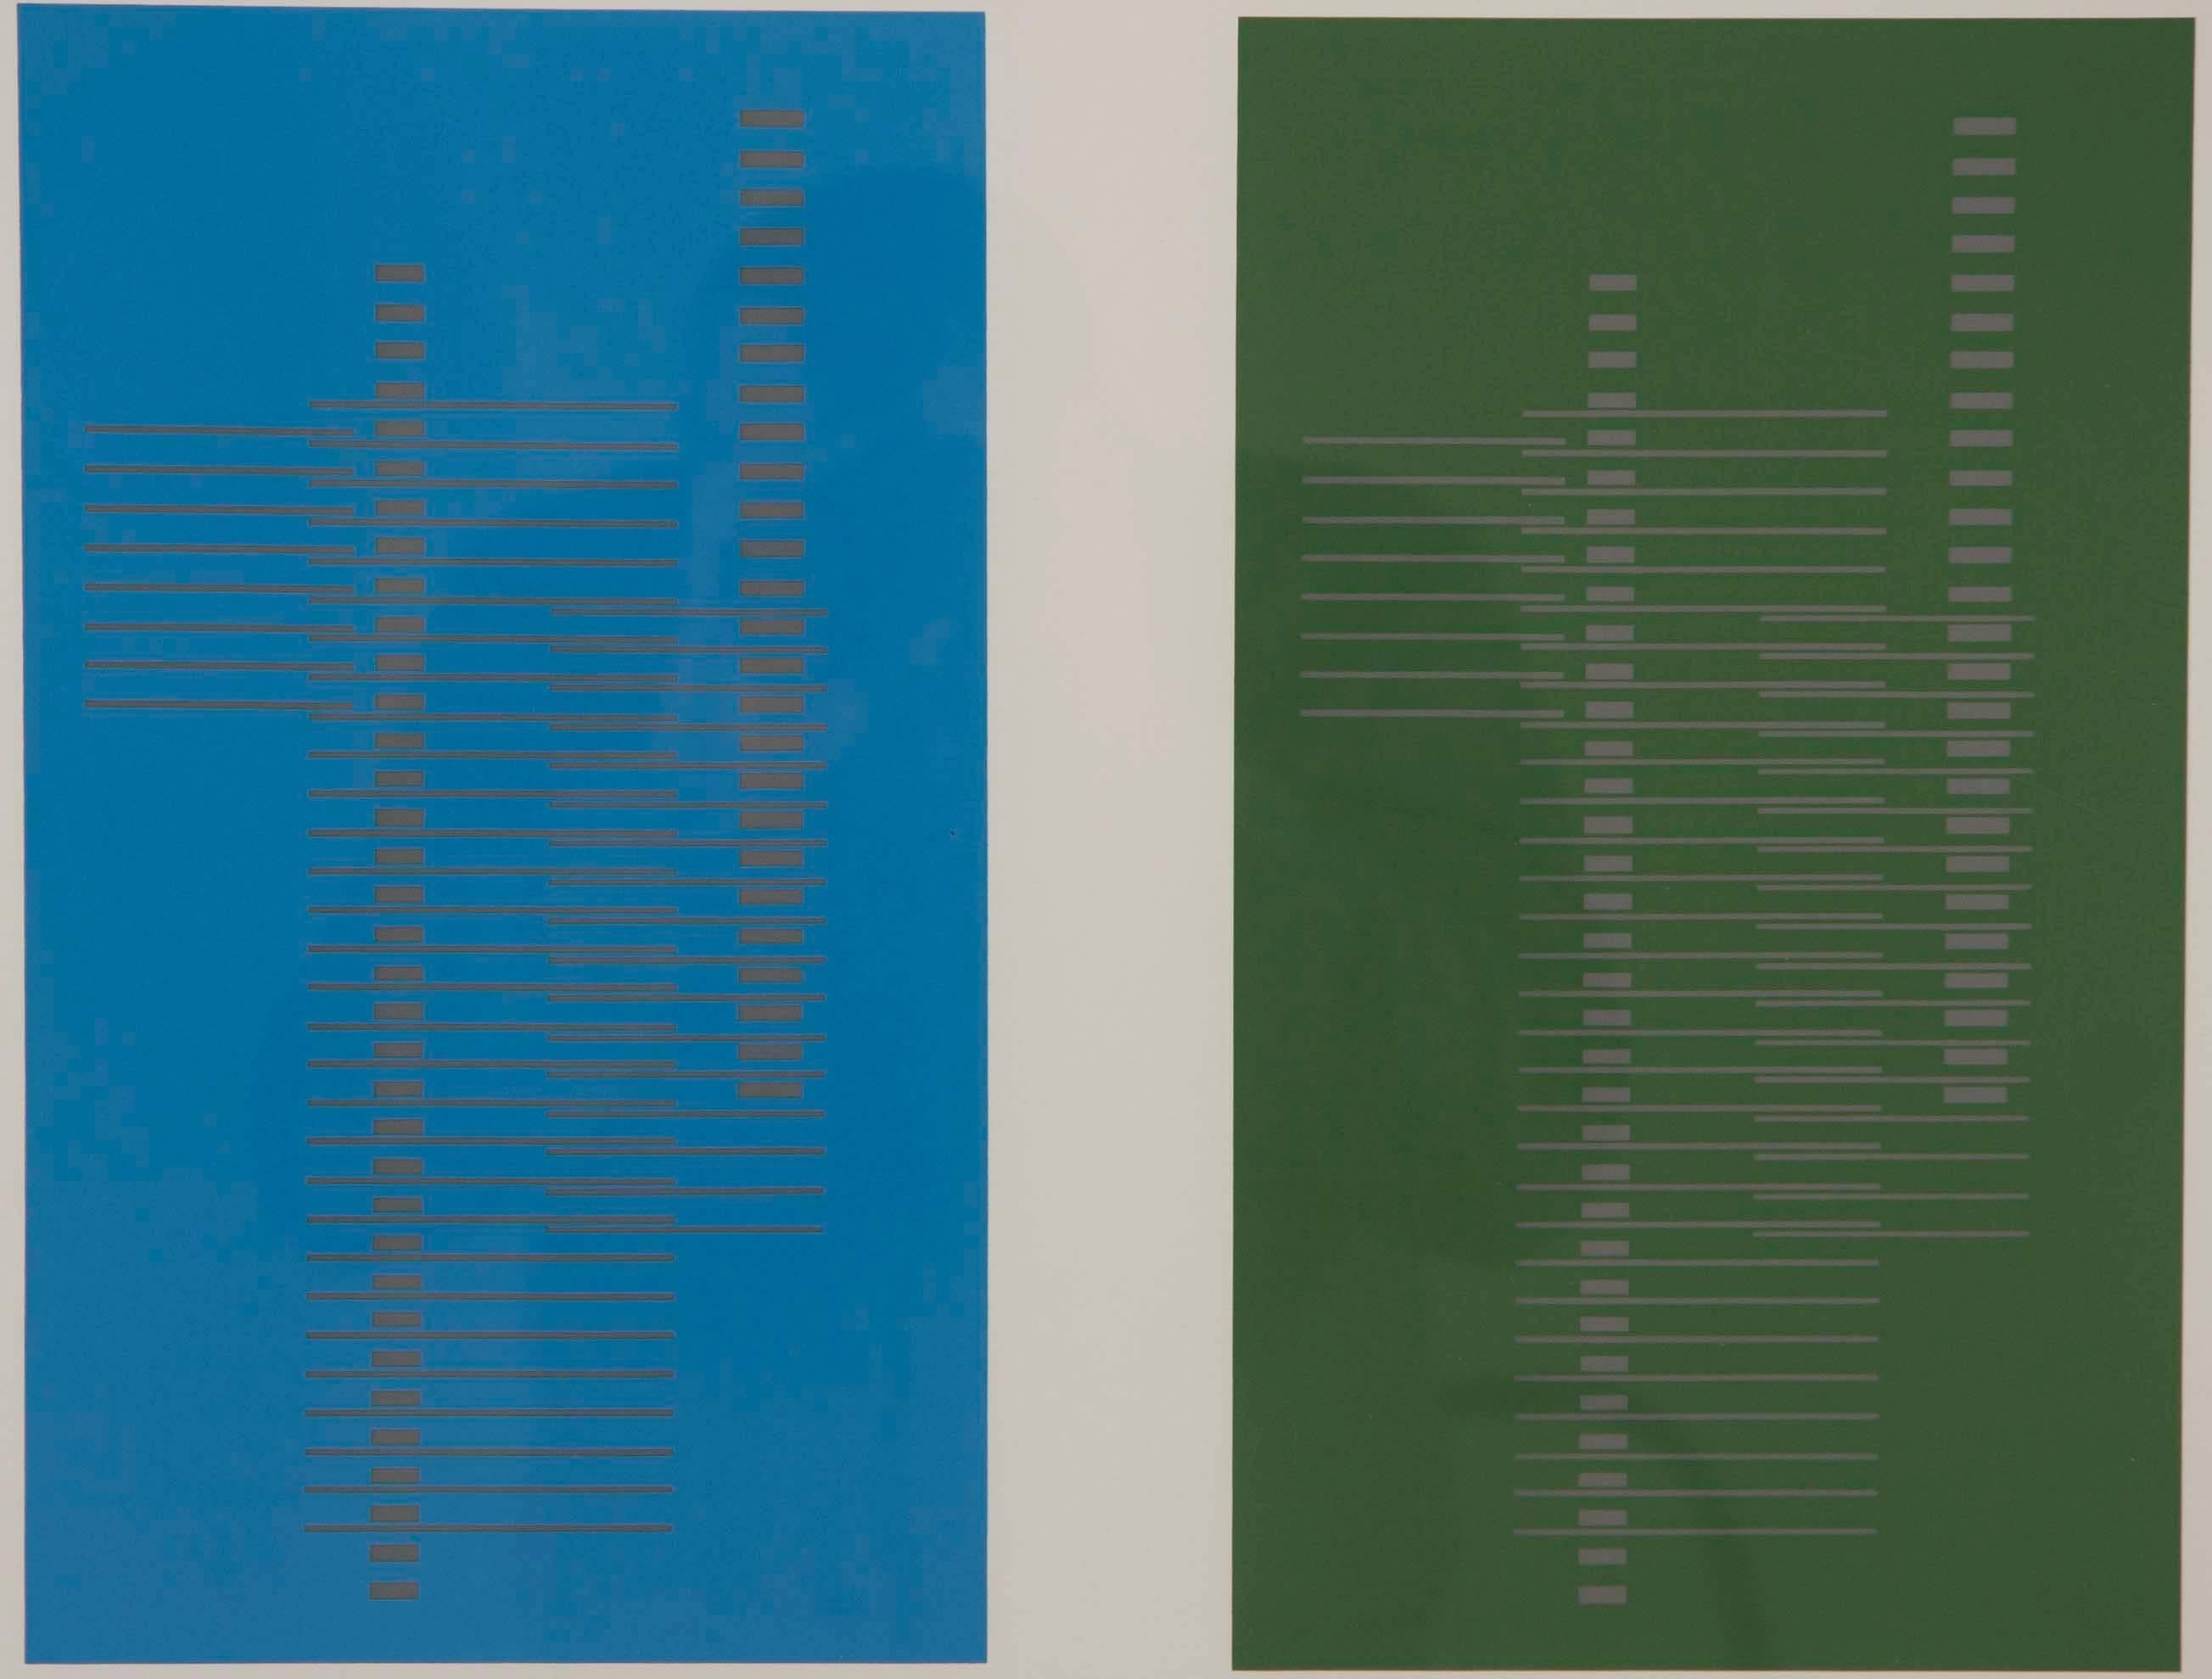 Josef Albers from Formulation: articulation, 1972. Silkscreen prints, folio 1/folder 6. Floated in silver gilt frame using all acid free archival materials. #176 of 1000 printed. Printed by Sirocco screen printing, New Haven. Published by